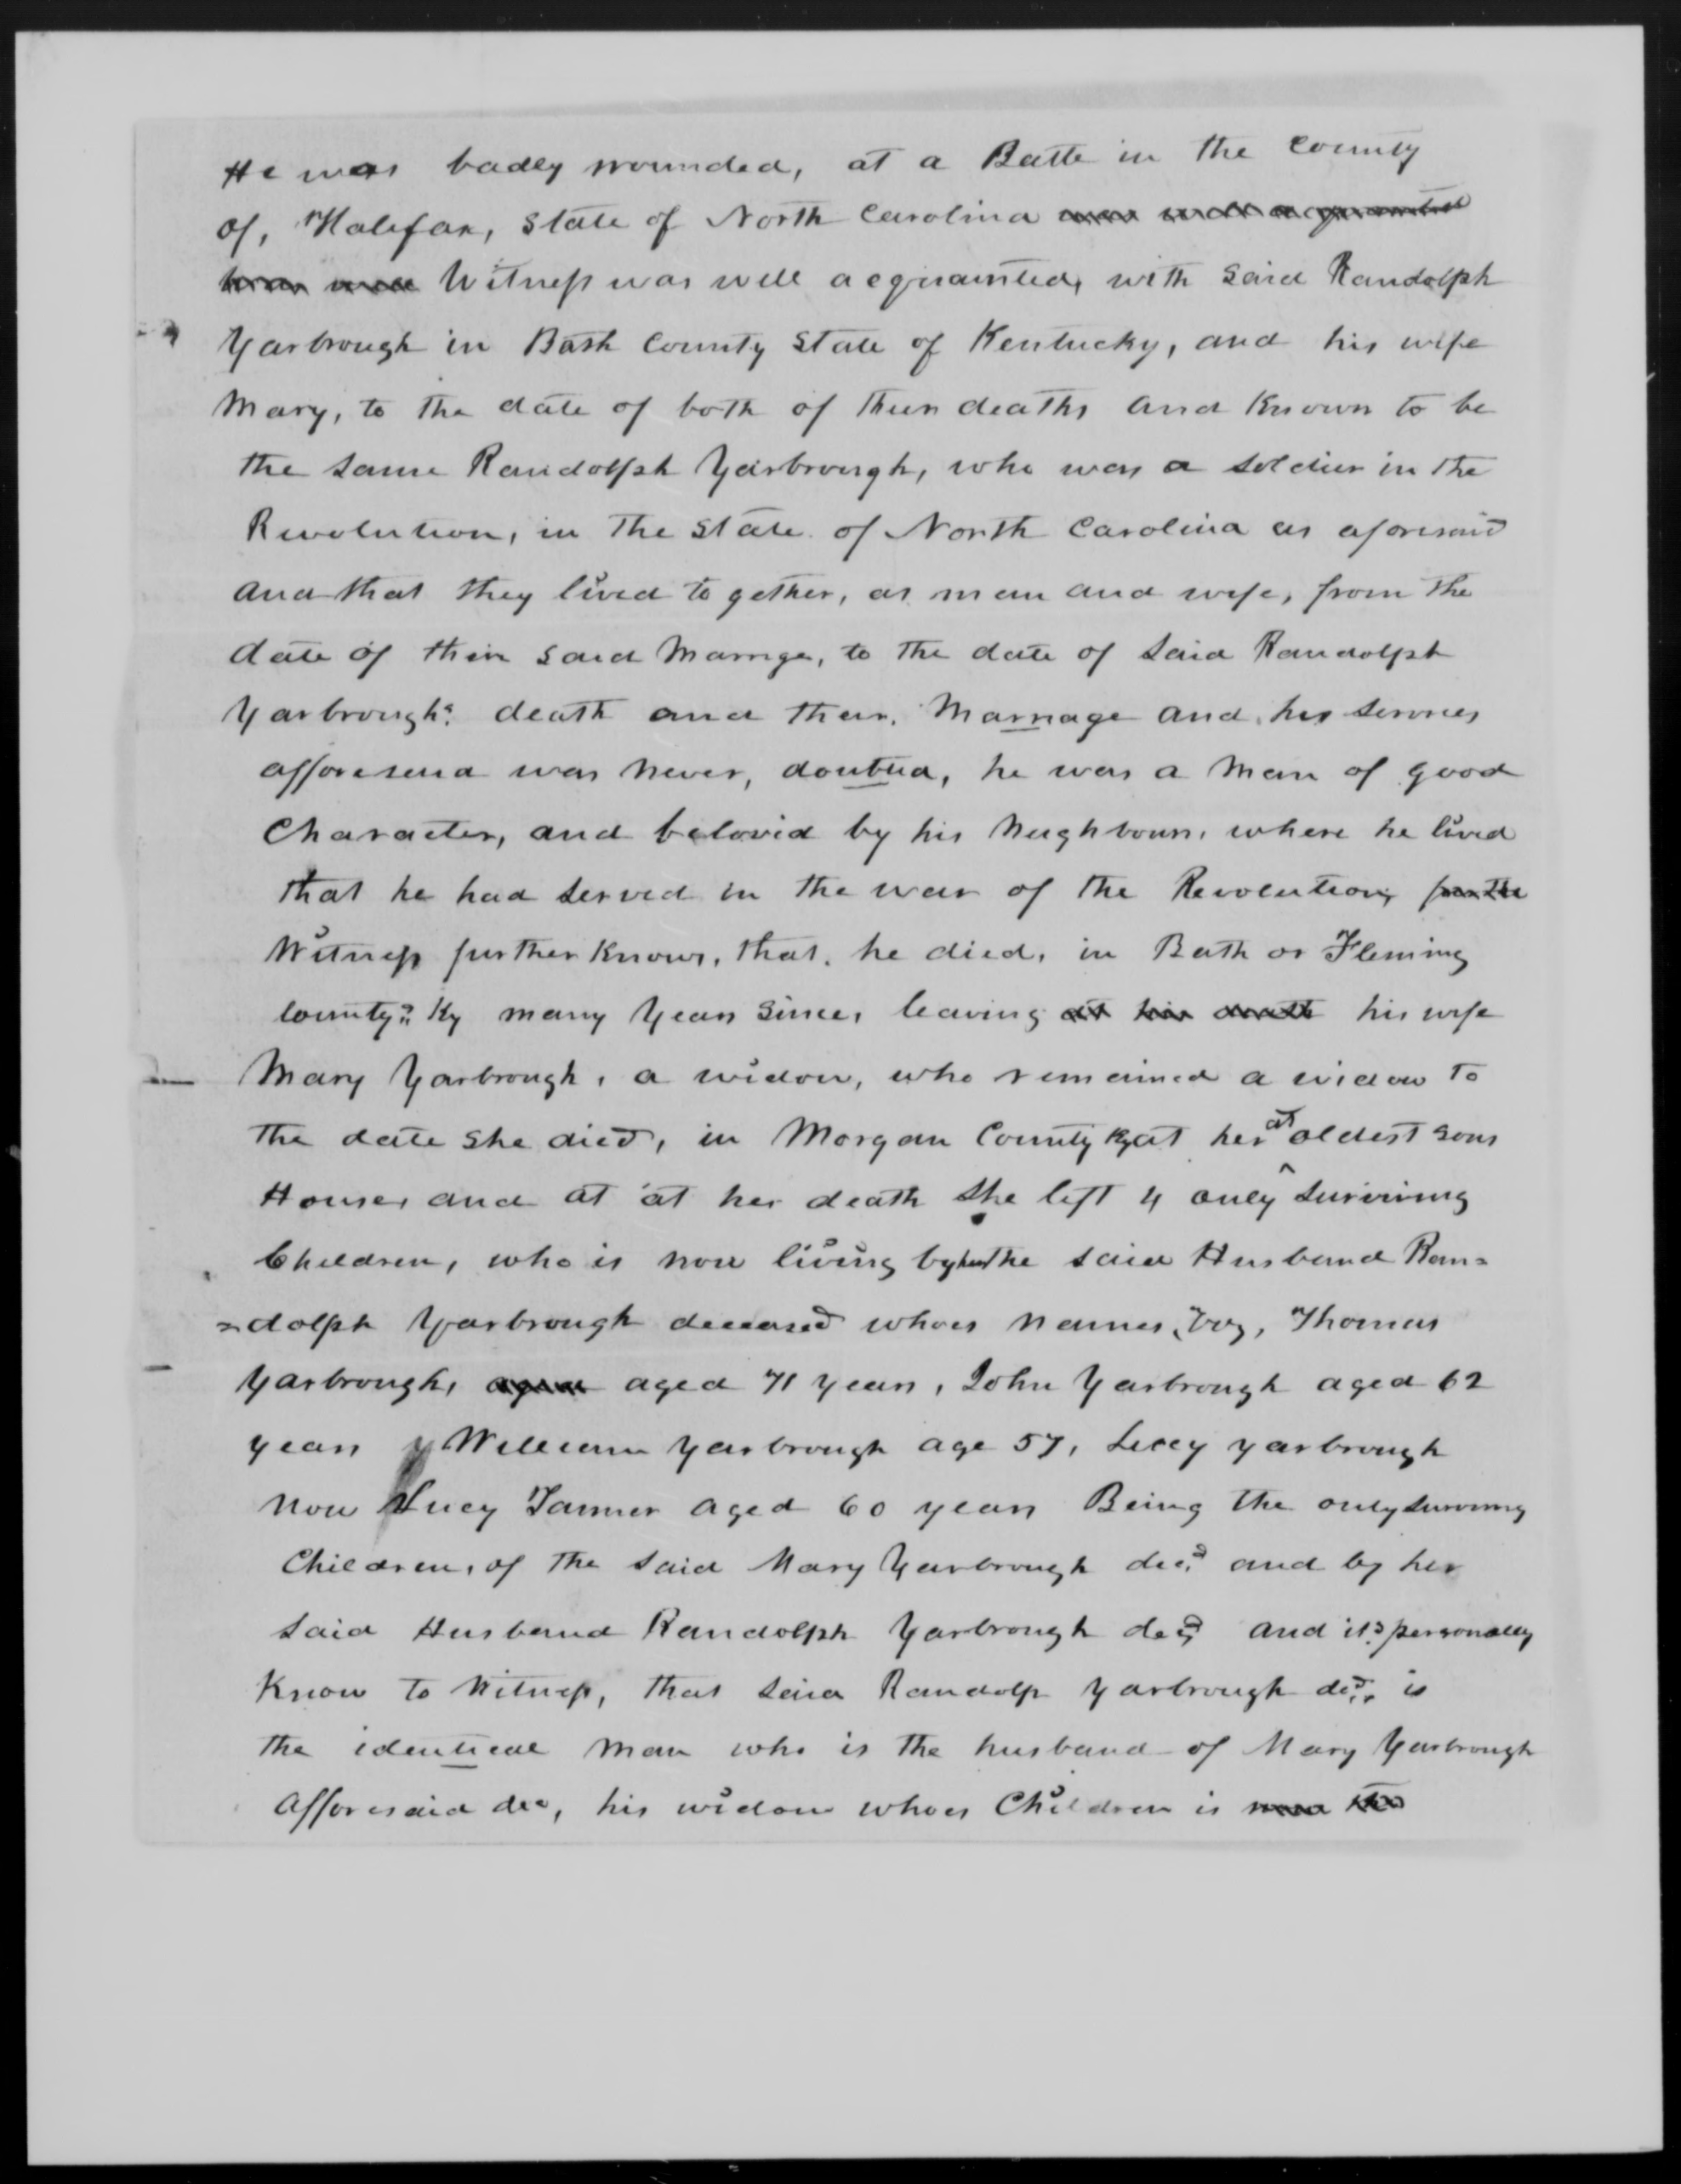 Affidavit of Nancy Boyd in support of a Pension Claim for Mary Yarborough, 24 January 1854, page 2